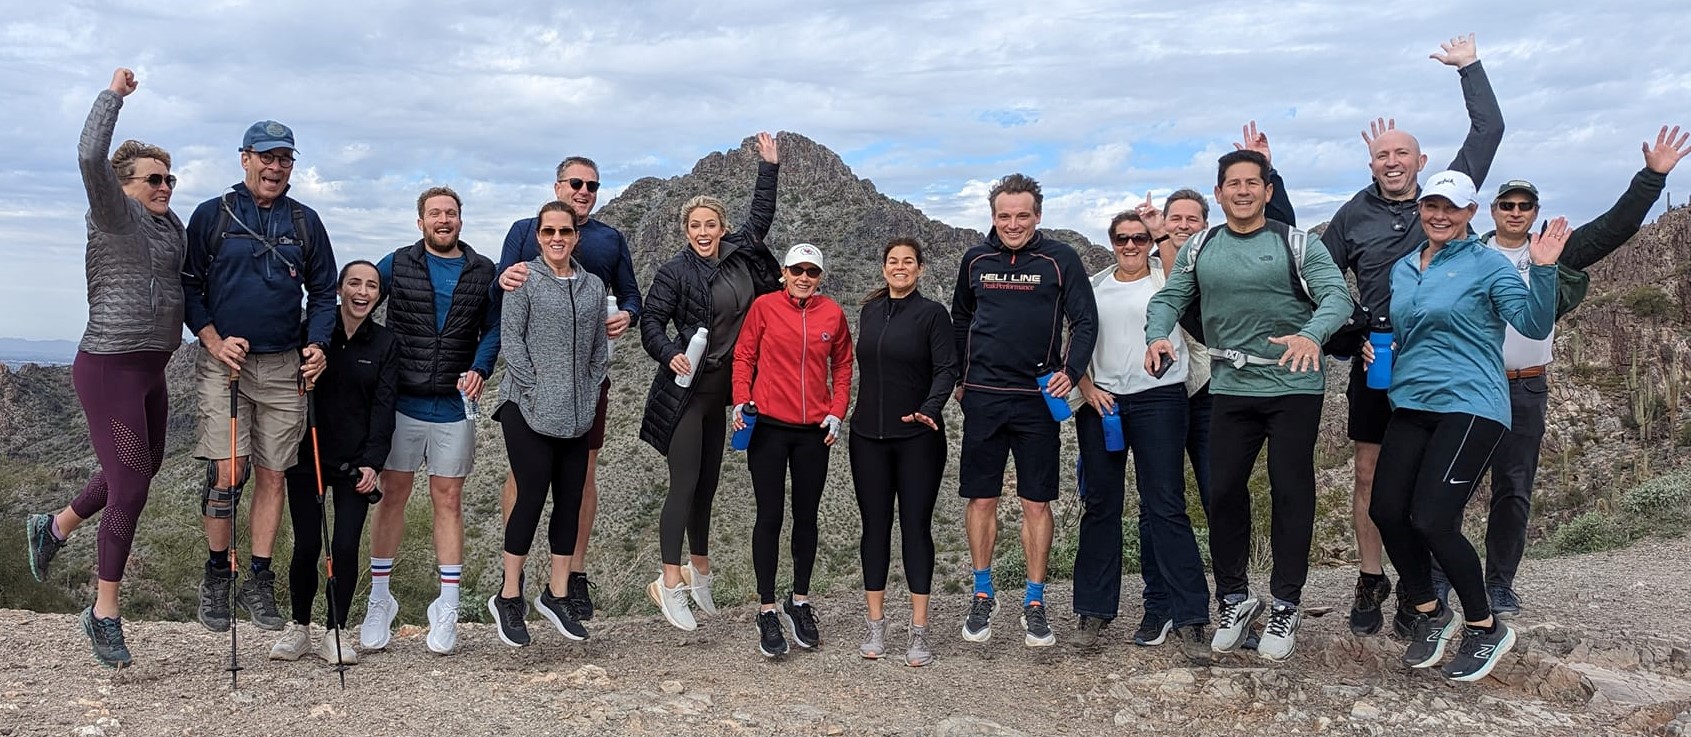 A Phoenix hiking tours group jumps for joy together in front of a scenic backdrop during a adventure with the Wild Bunch Desert Guides.